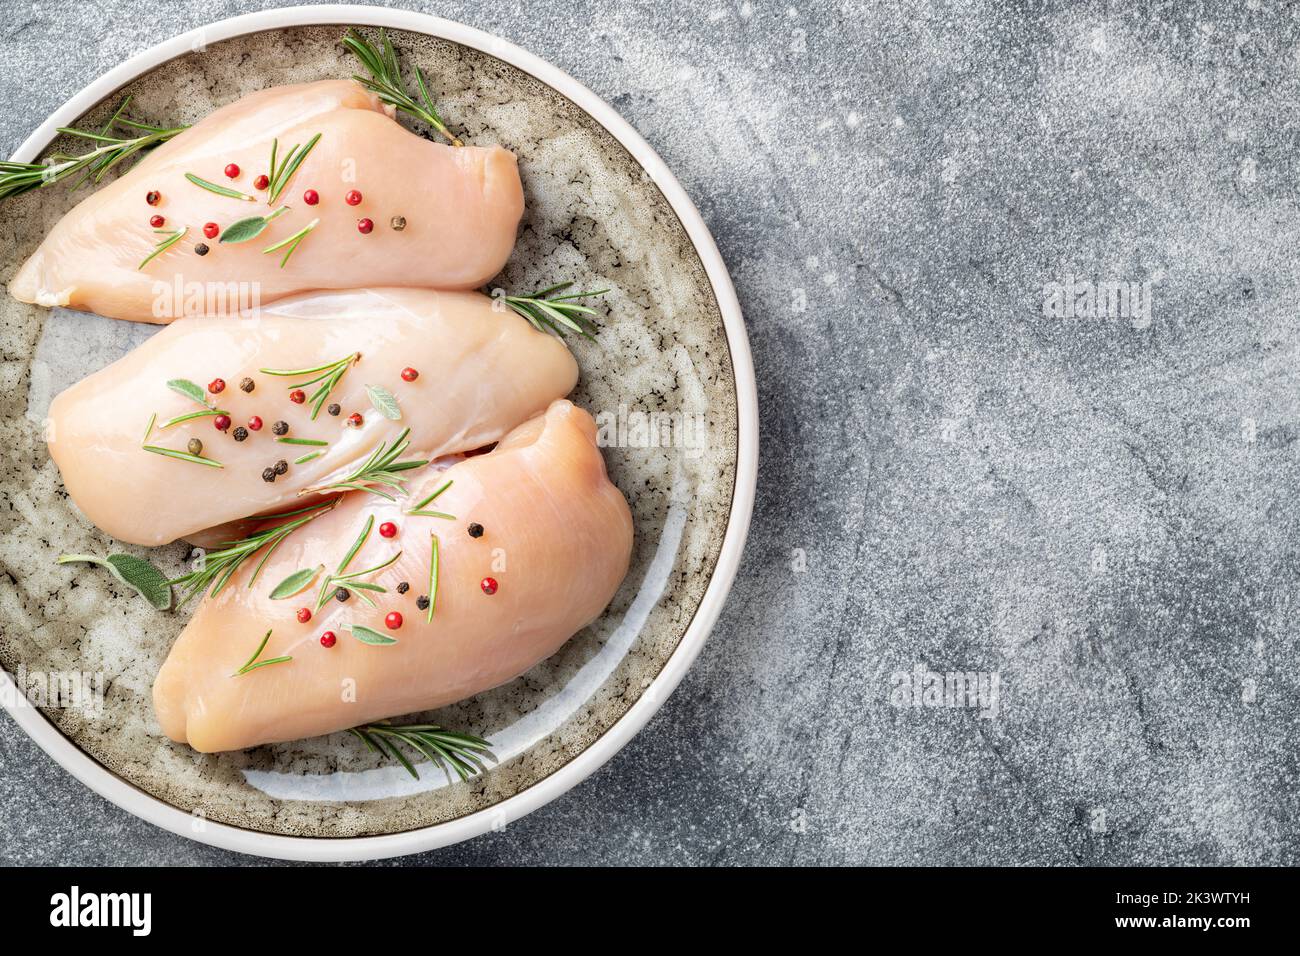 Raw uncooked chicken breasts with spices and herbs on gray concrete table, chicken meat with ingredients for cooking. Top view Stock Photo